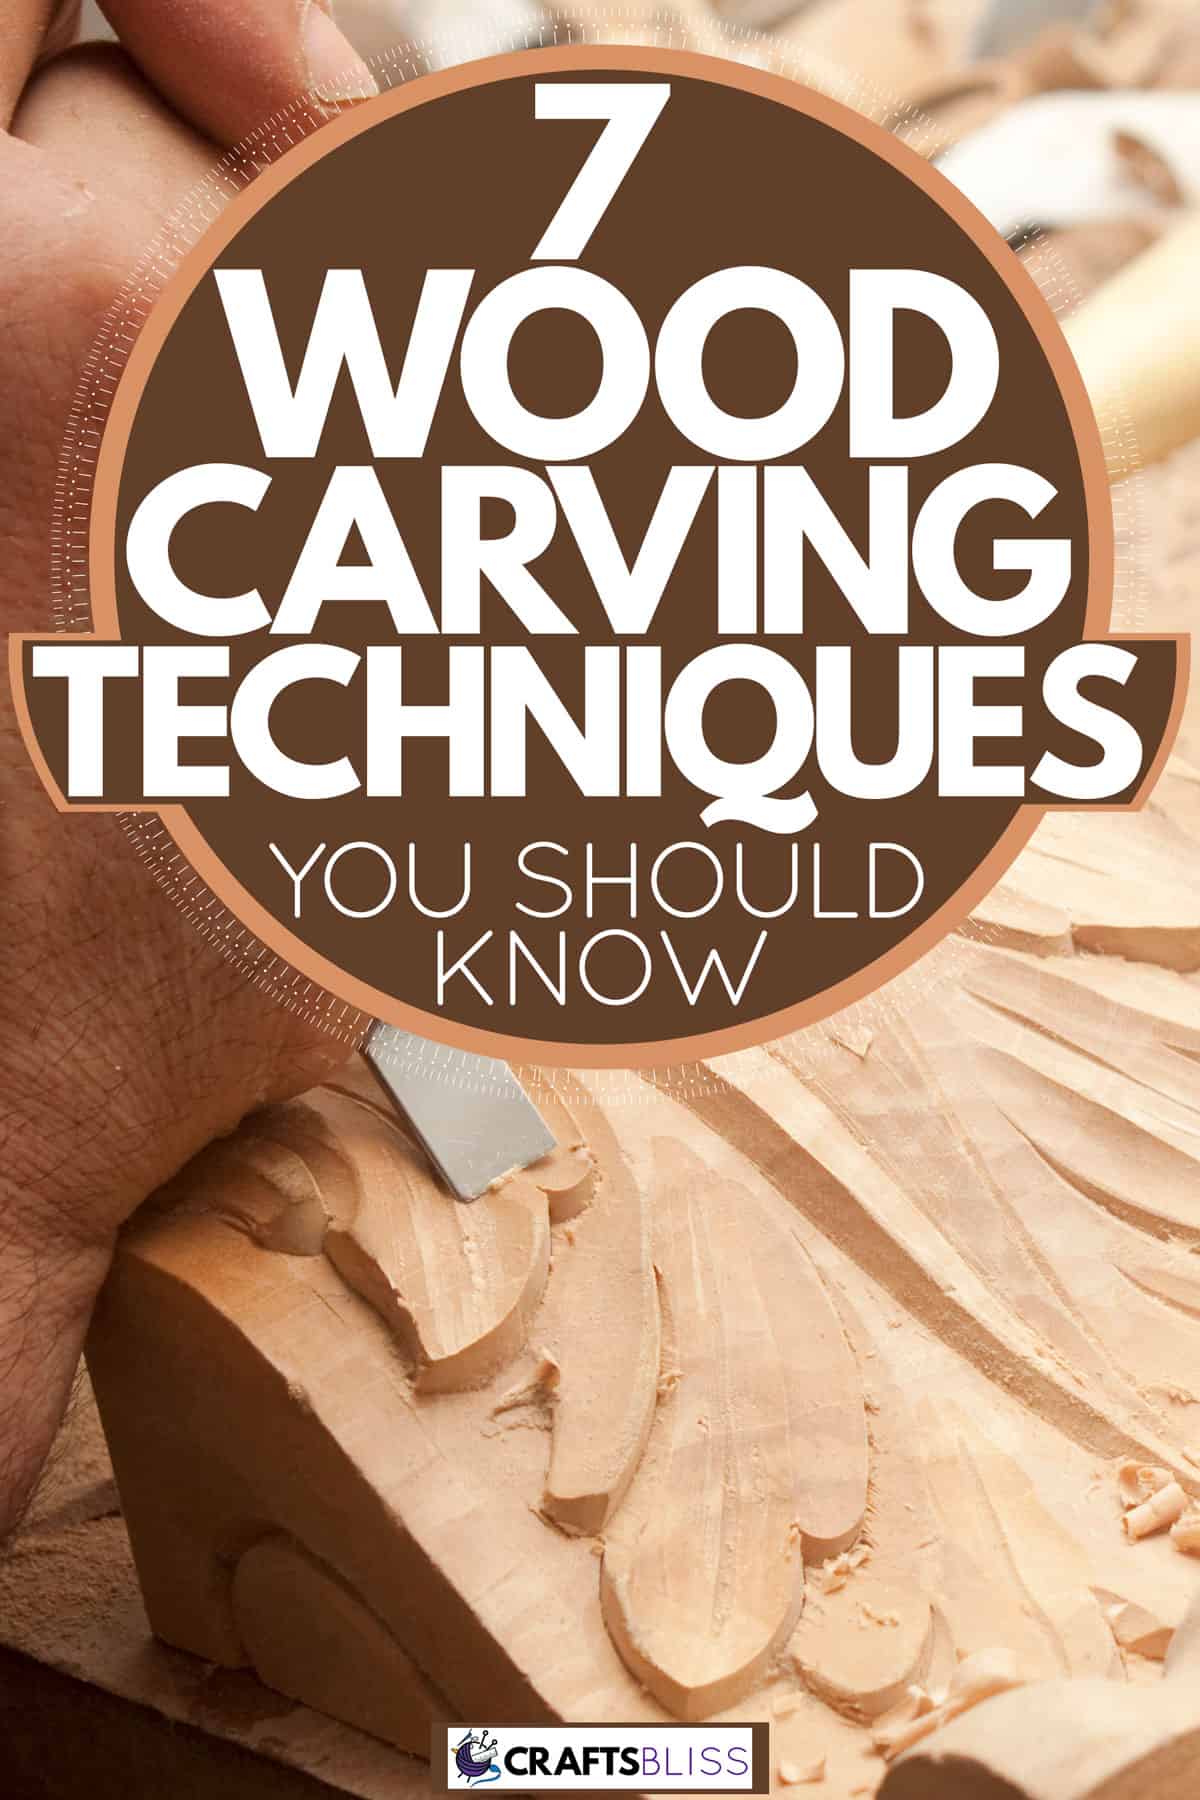 A man using a chisel to carve his wood carving project, 7 Wood Carving Techniques You Should Know